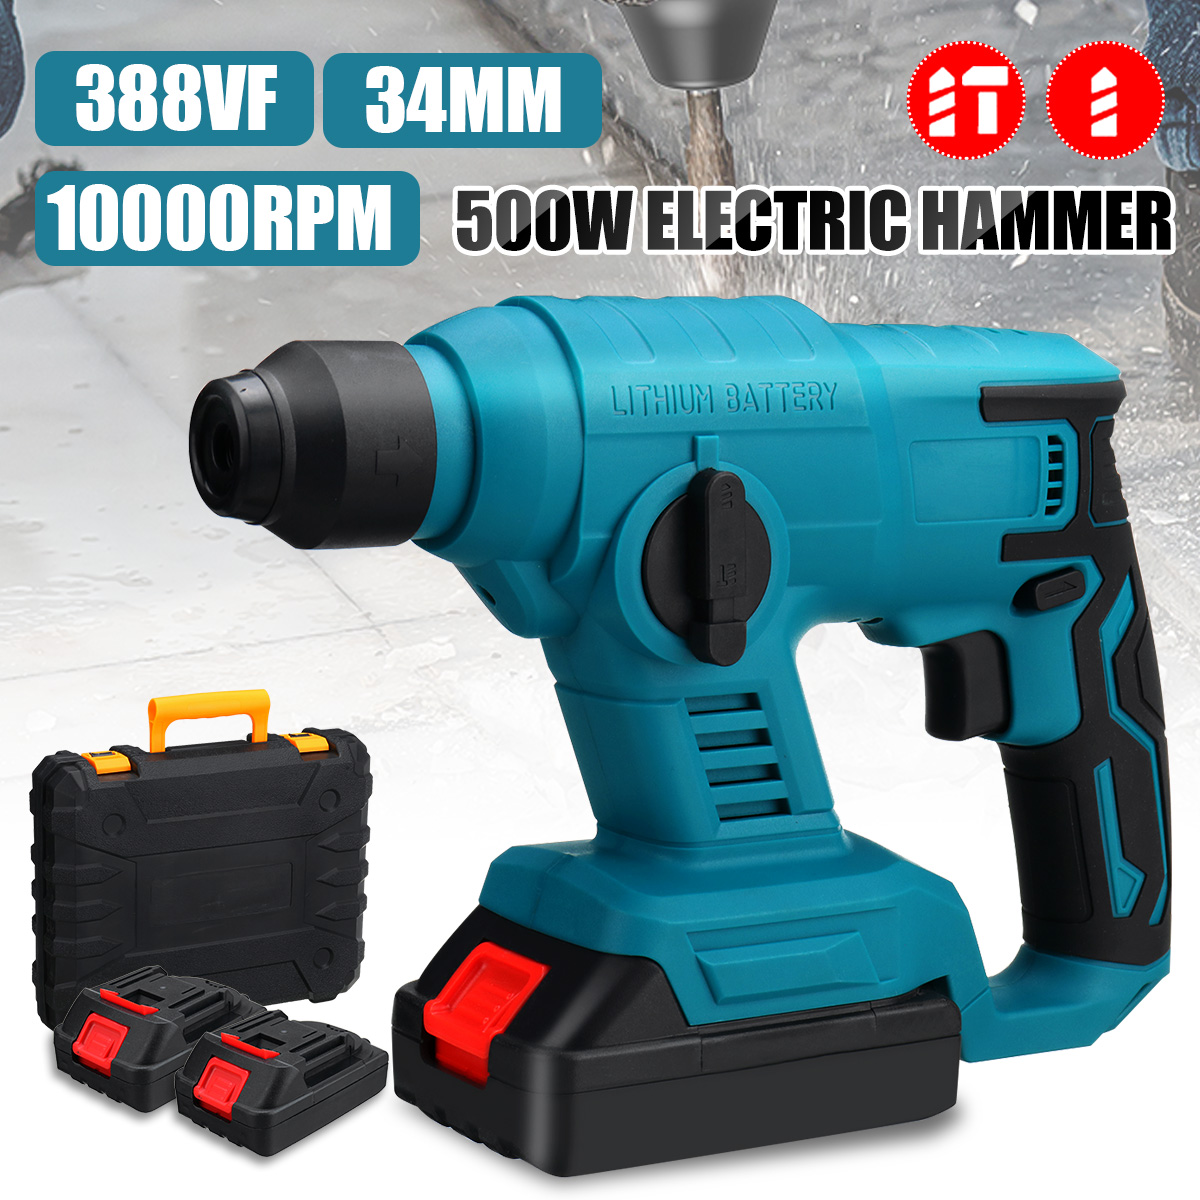 500W-10000RPM-Brushless-Cordless-Electric-Hammer-Handheld-Flat-Drill-with-Battery-1943453-1